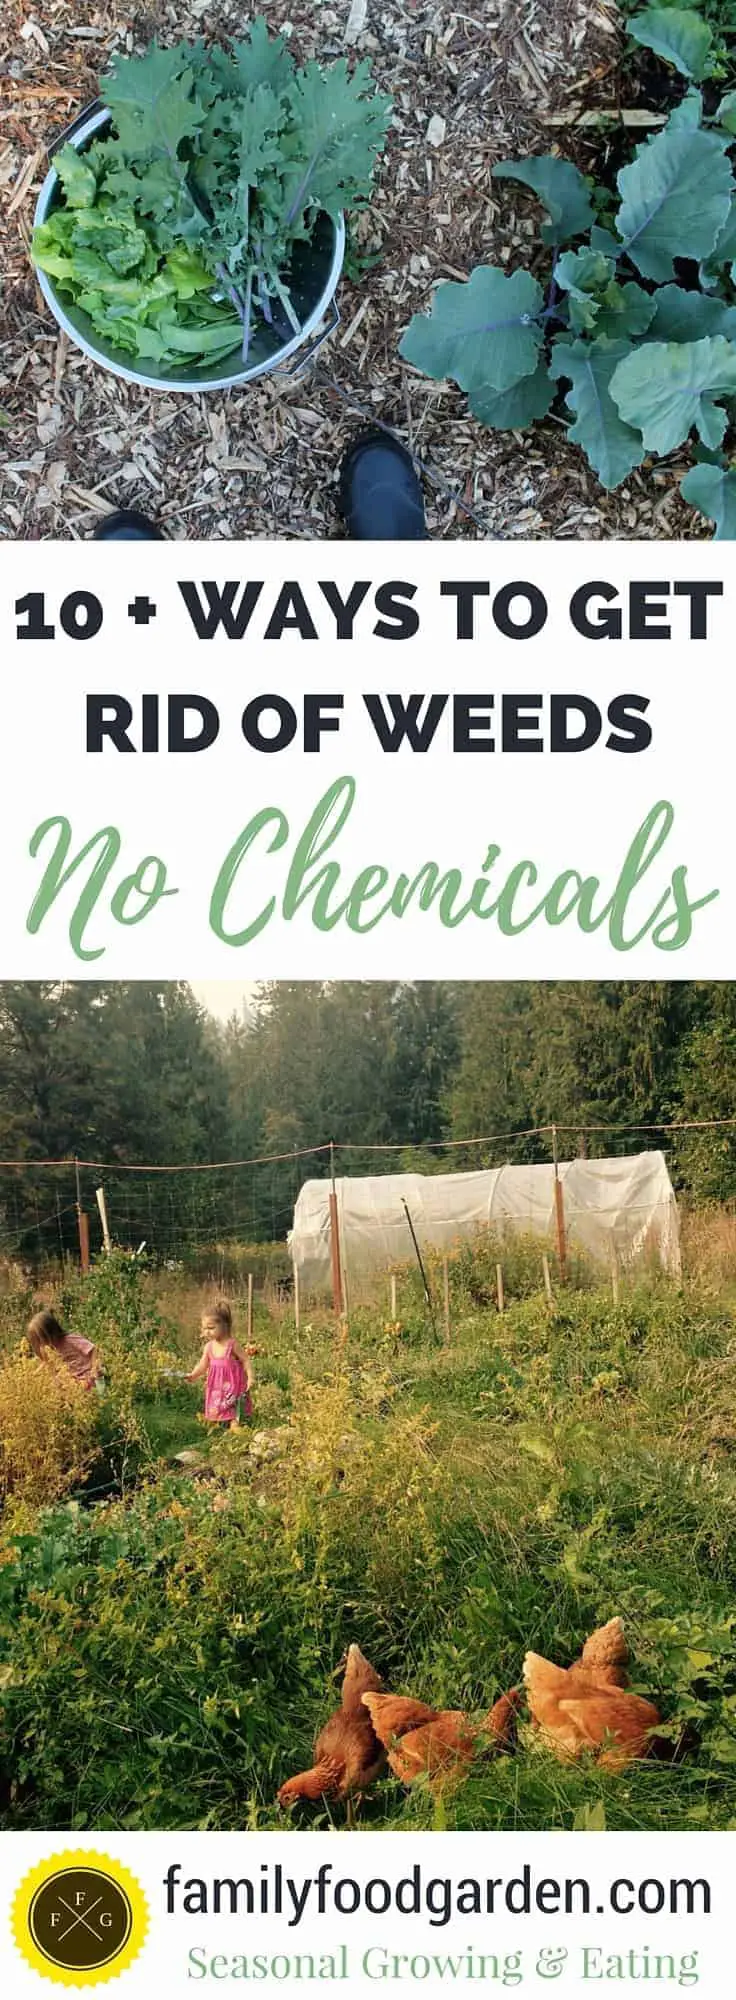 Remove weeds naturally & without chemicals!